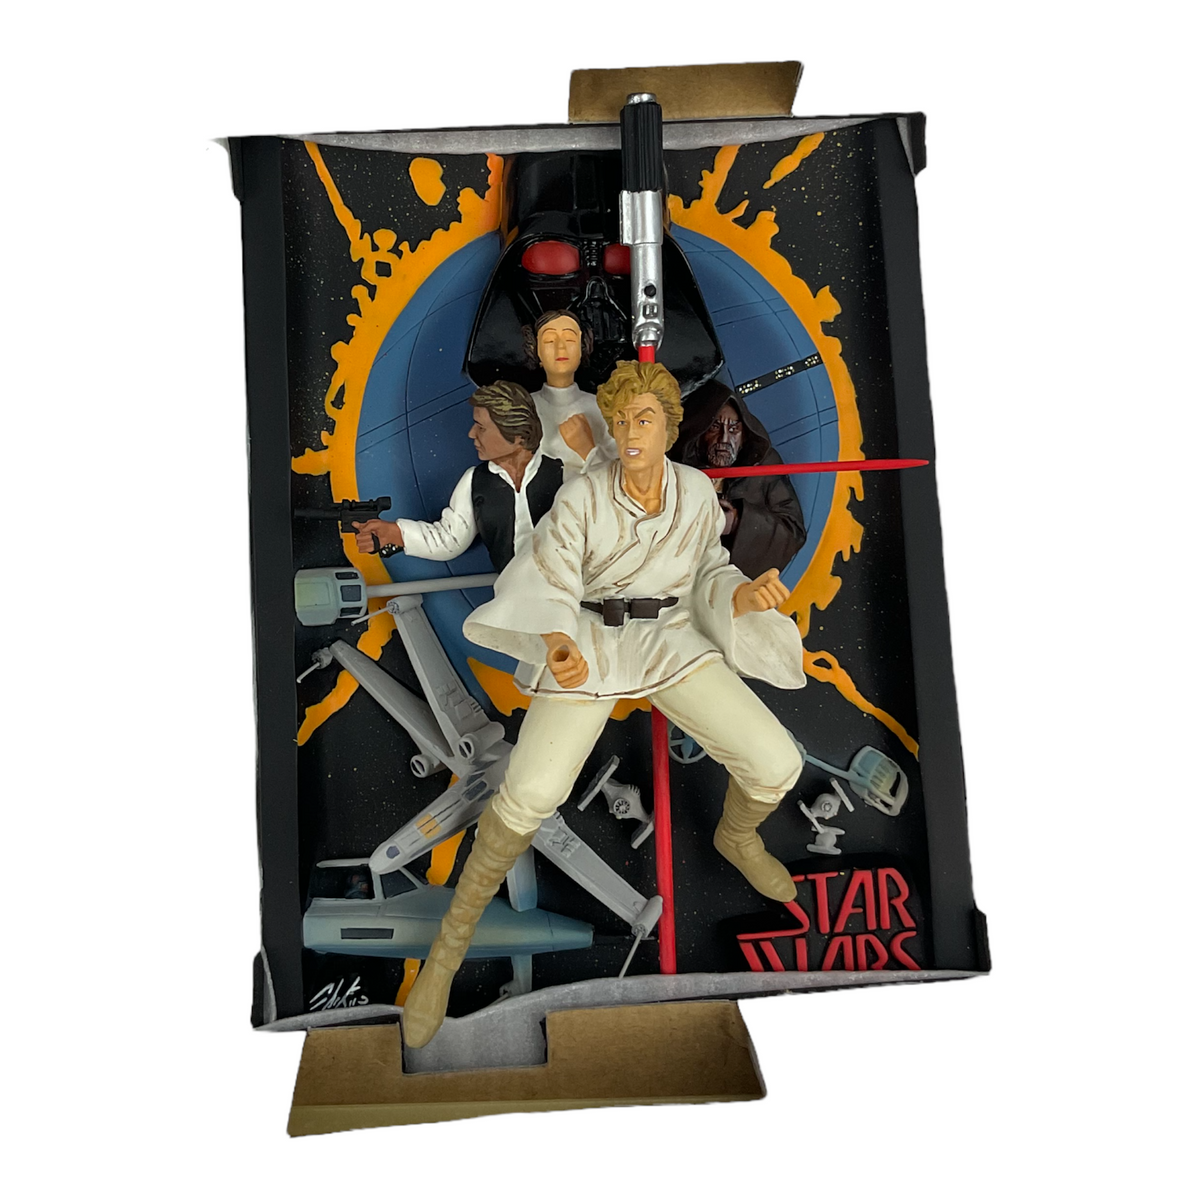 Star Wars Chaykin Mini Poster Sculpture (Comic Con Exclusive) by Code 3